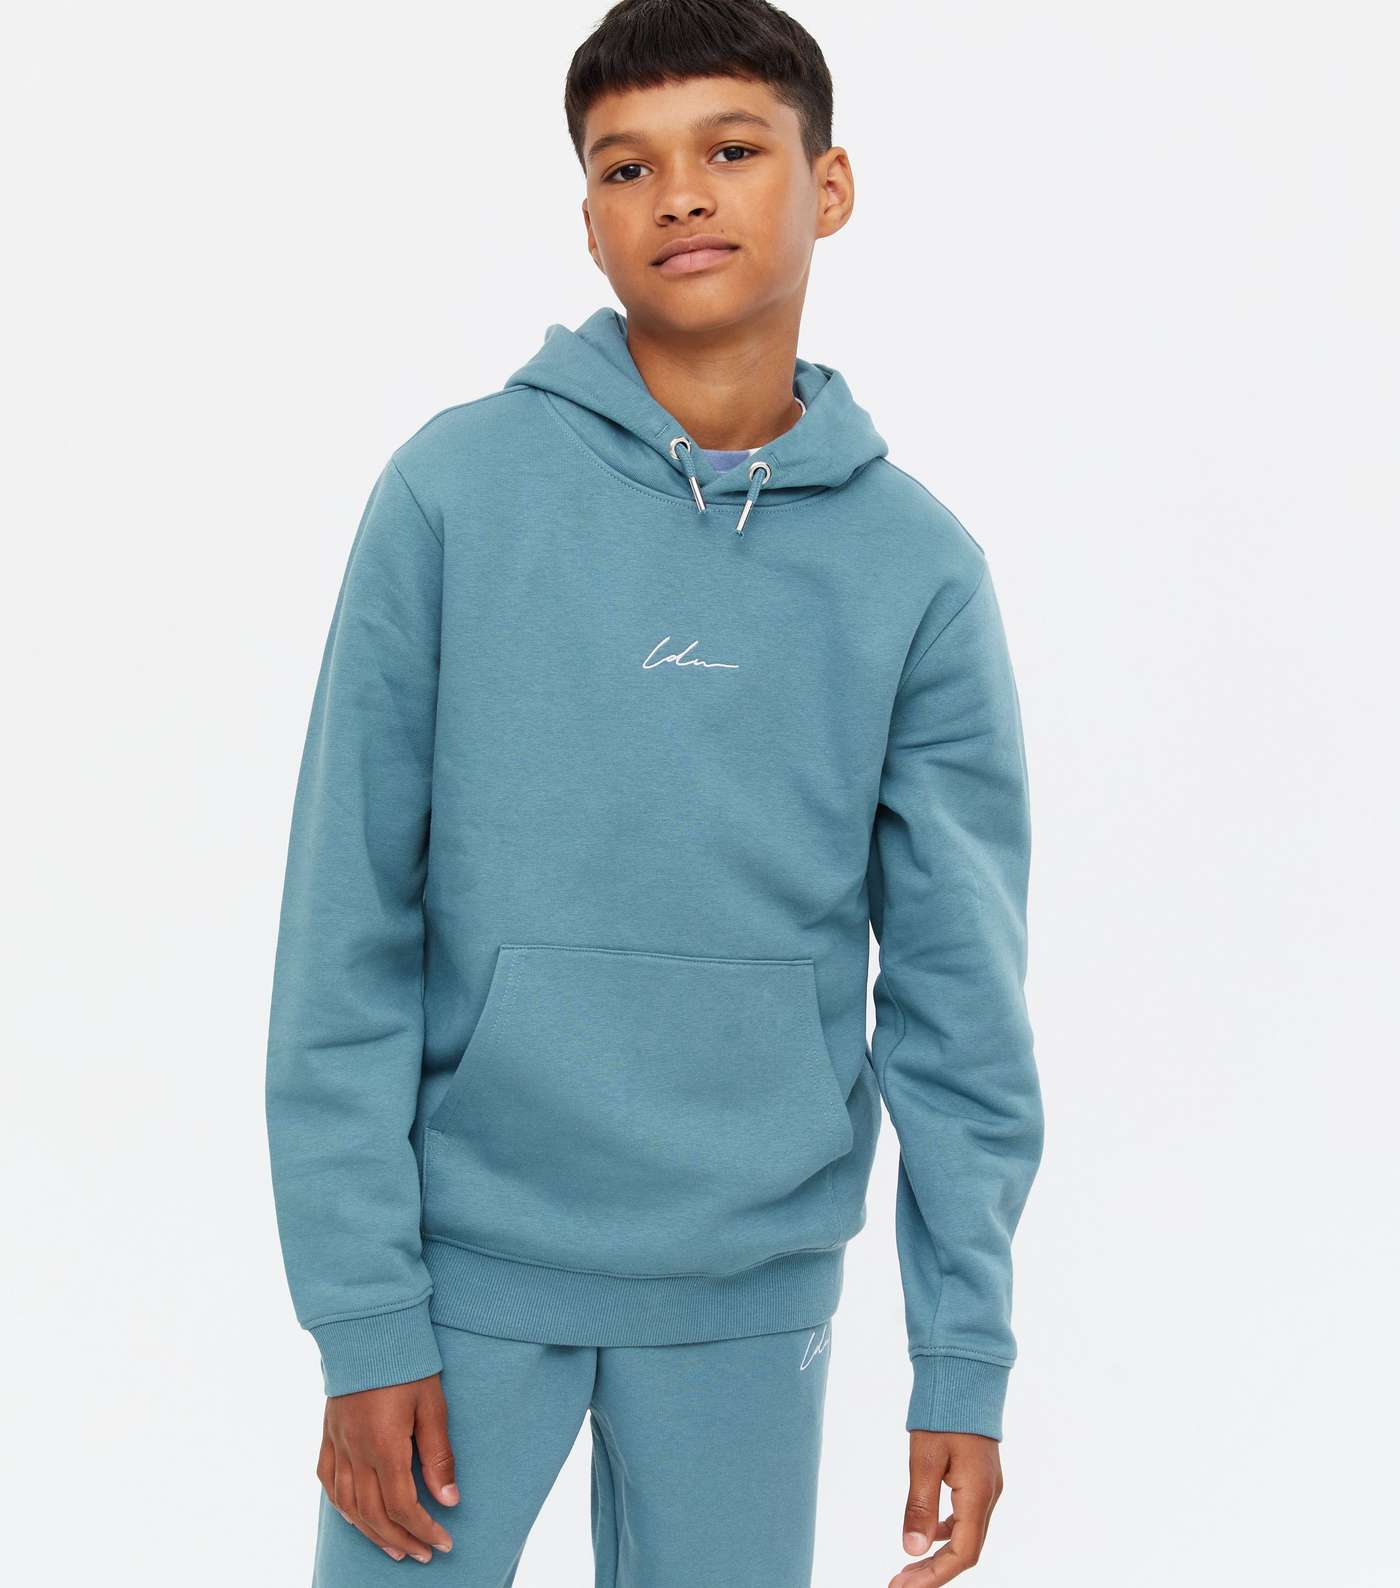 Boys Blue LDN Embroidered Hoodie